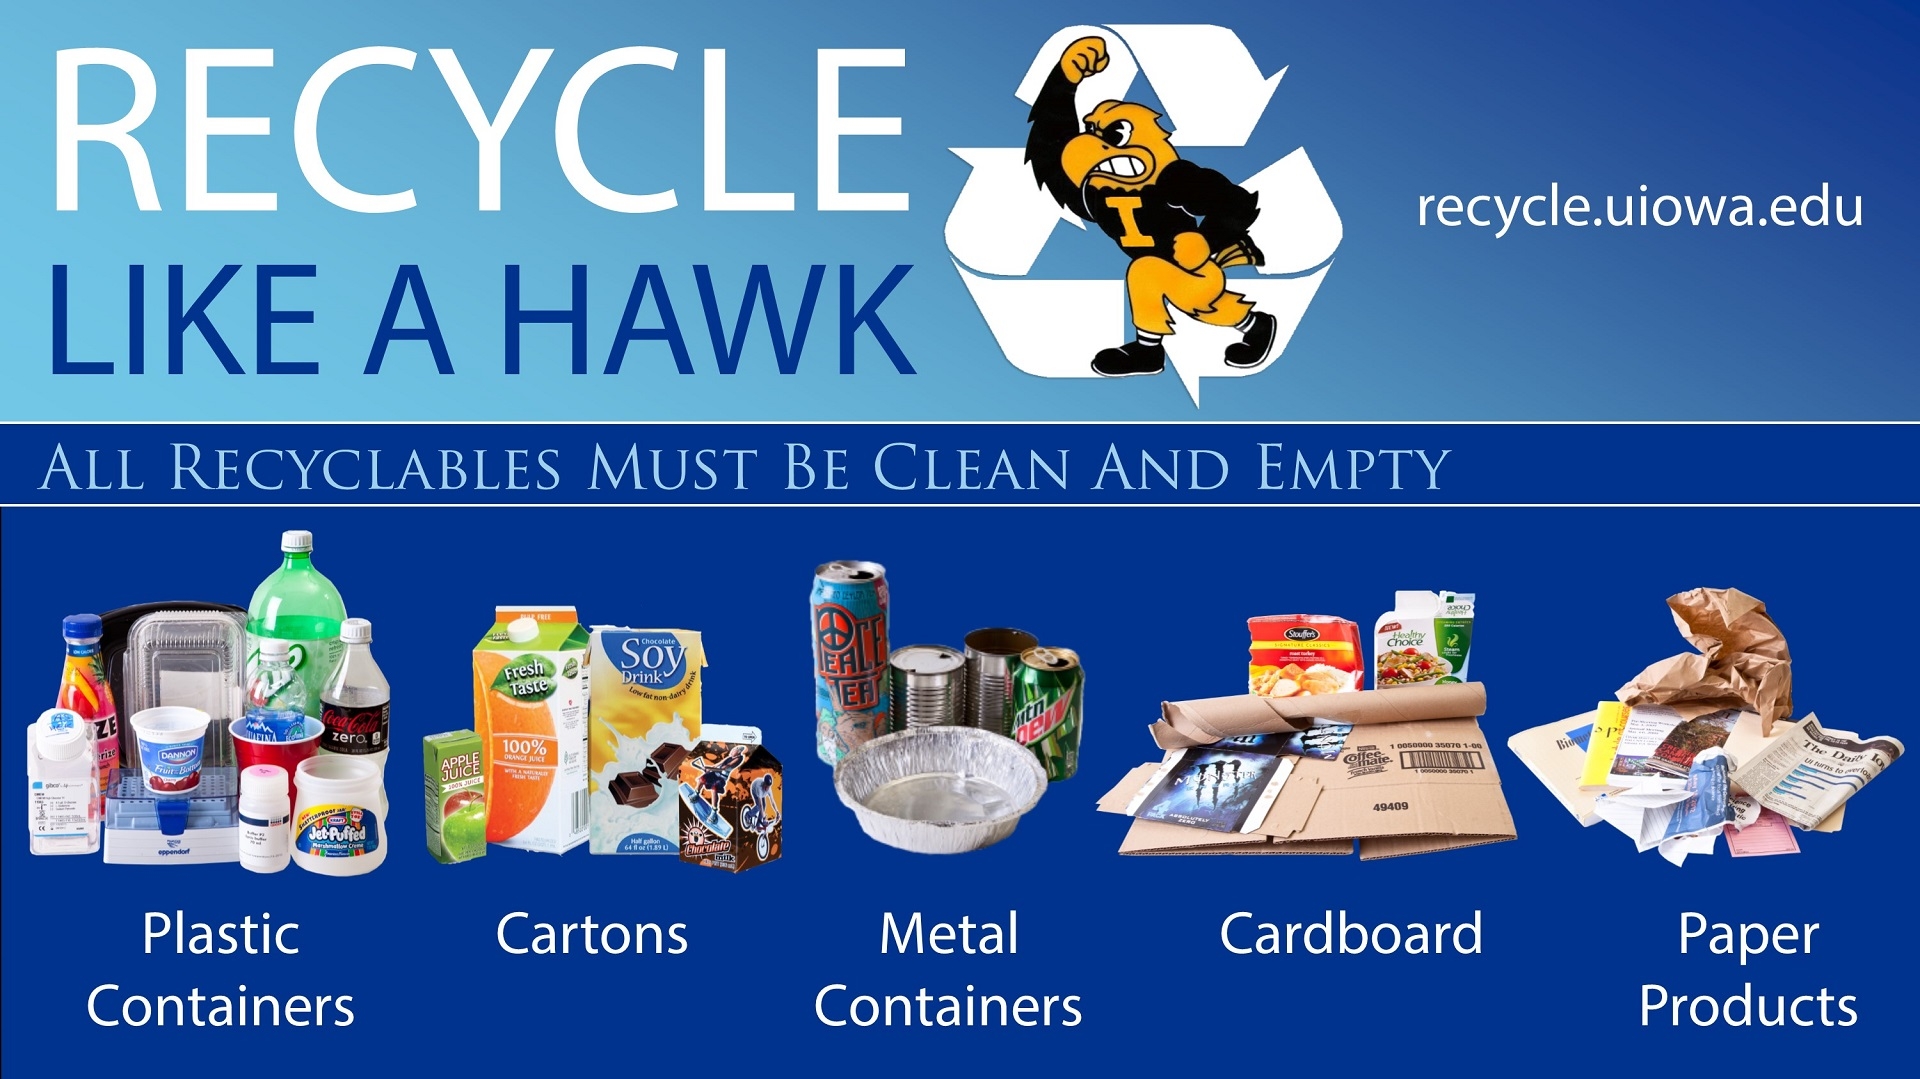 Recycle Like a Hawk recycle.uiowa.edu All recyclables must be clean and empty. Plastic containers, cartons, metal containers, cardboard, paper products